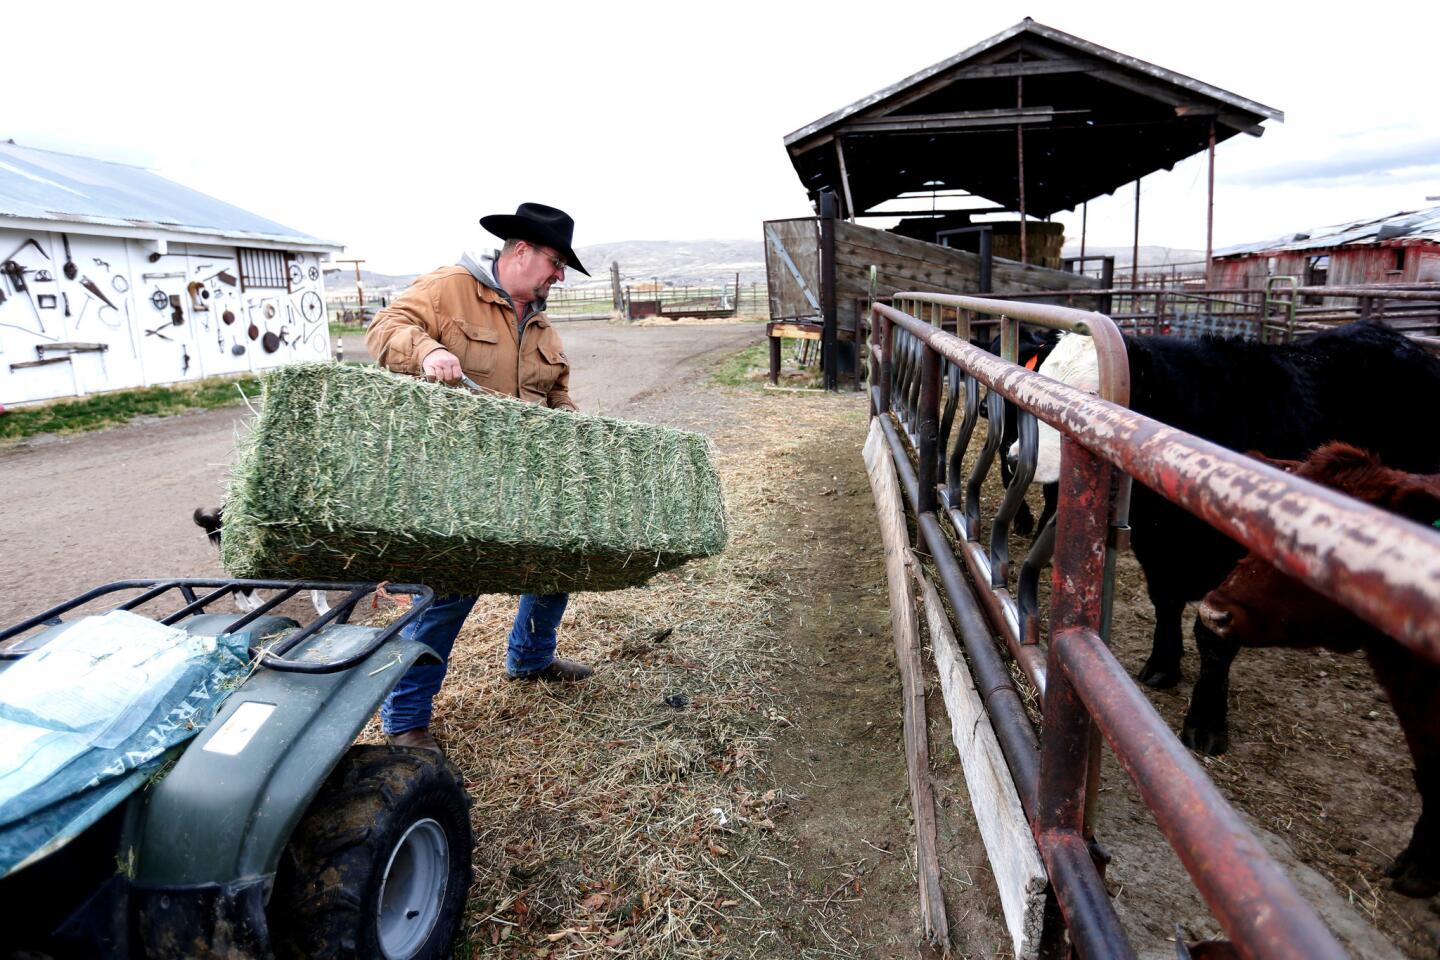 Lassen County Supervisor Jeff Hemphill, a third-generation cattle rancher, works on his JD Hemphill Ranch in Janesville, Calif. In Lassen County, 78% of voters cast ballots for Donald Trump.